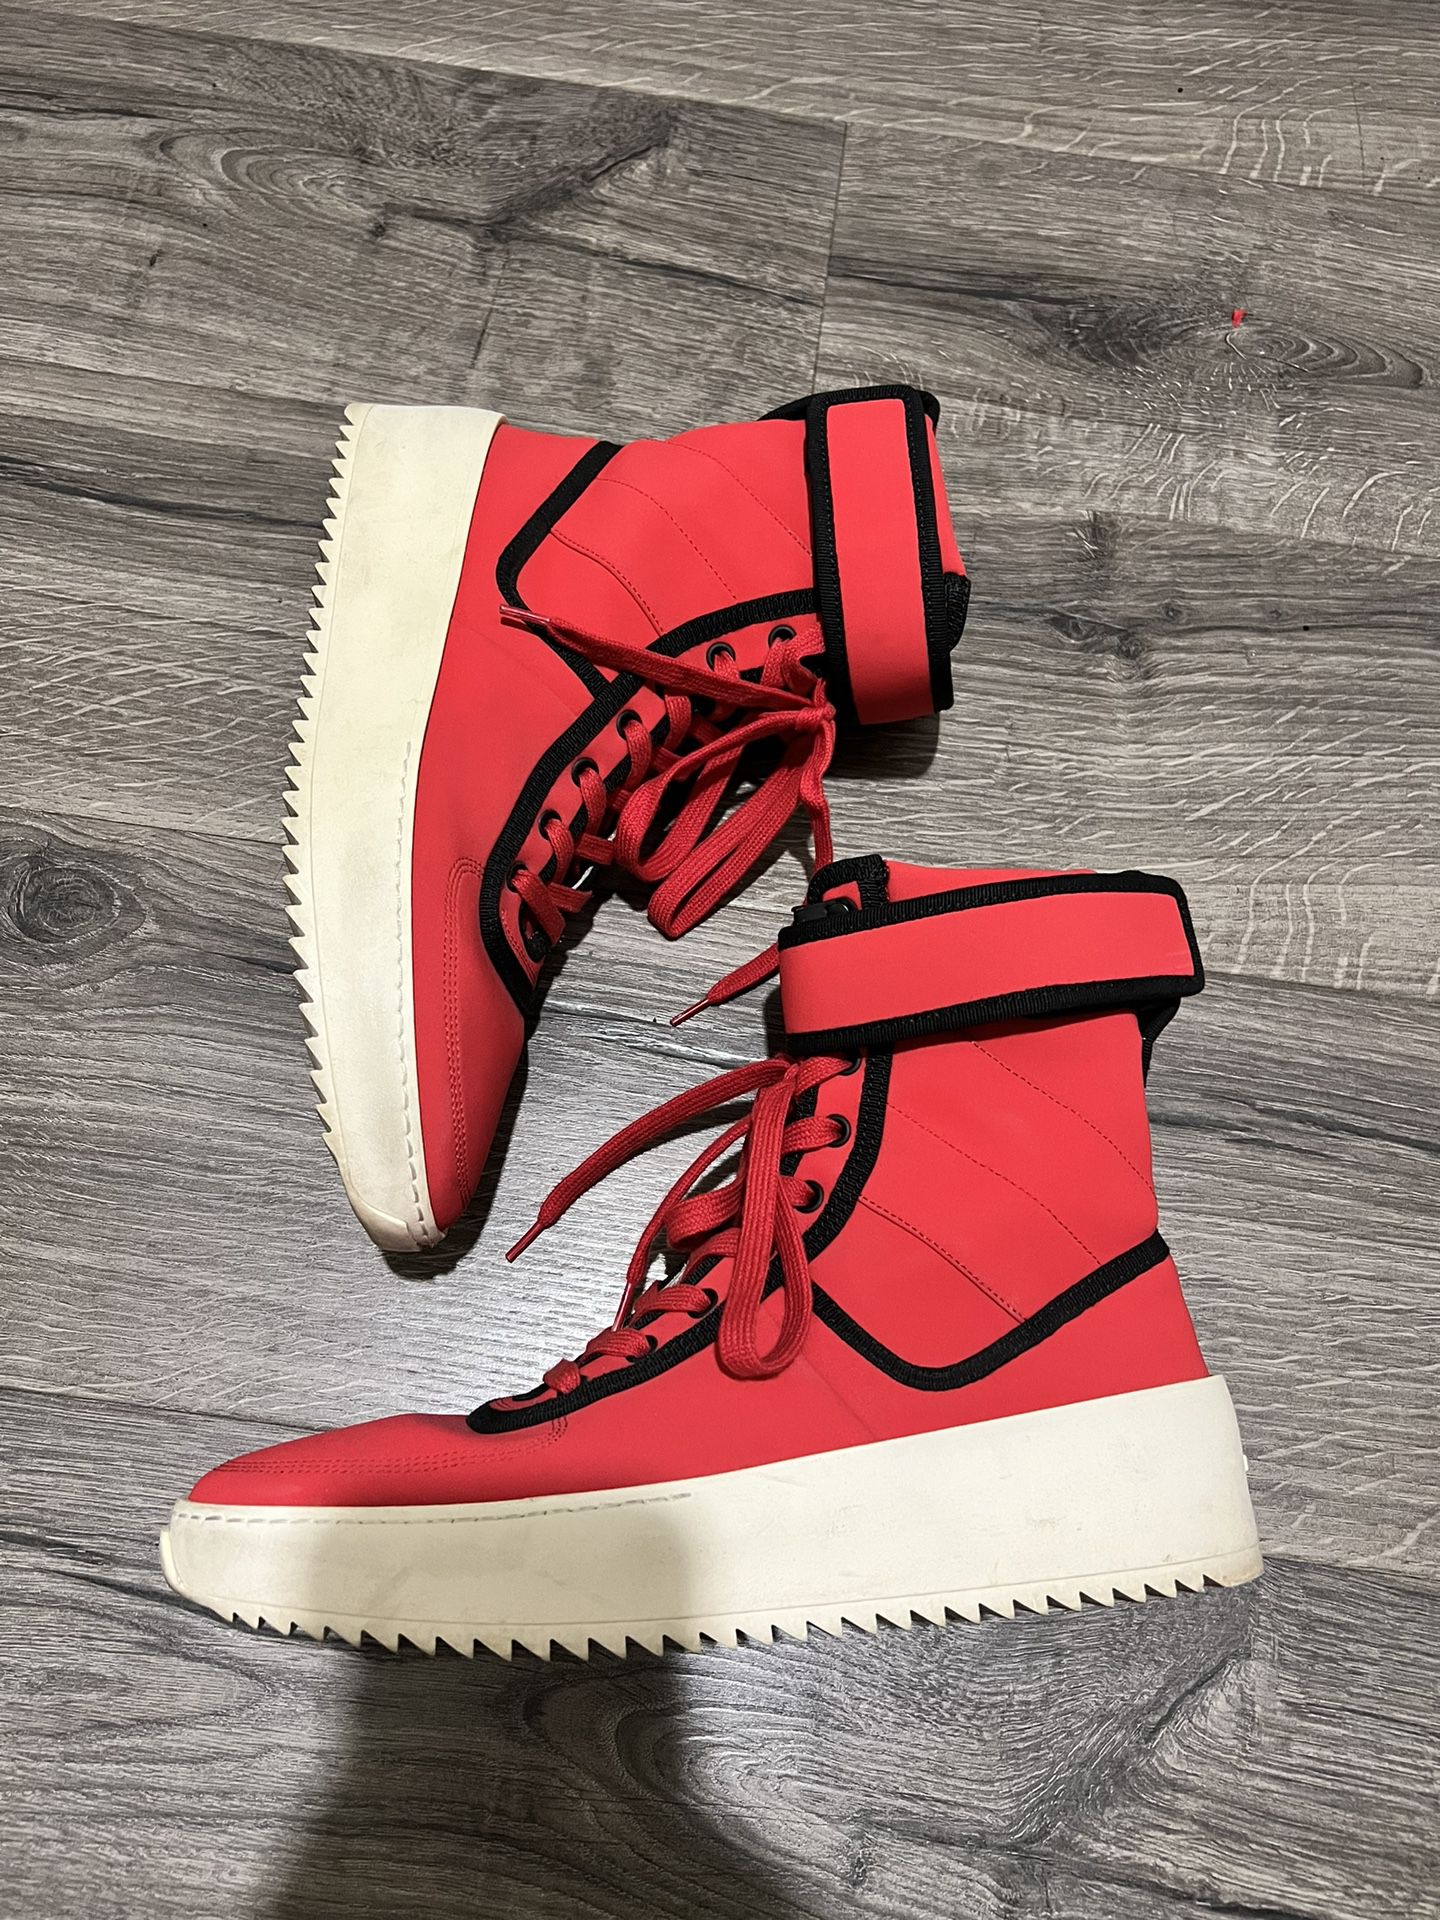 Fear Of God Military Boots Sneakers 